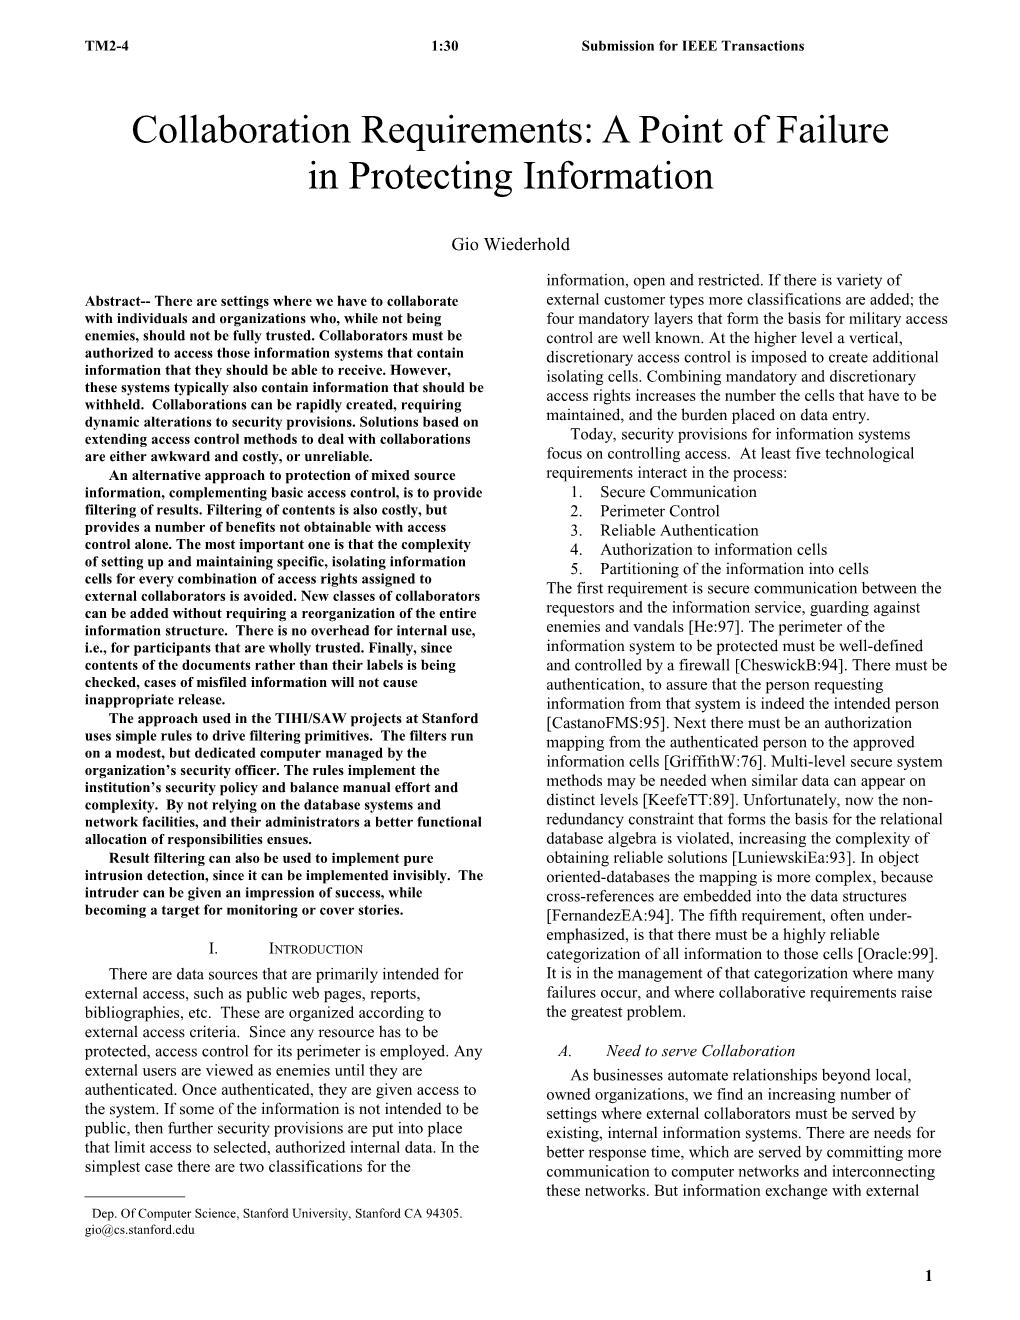 Collaboration Requirements: a Point of Failure in Protecting Information